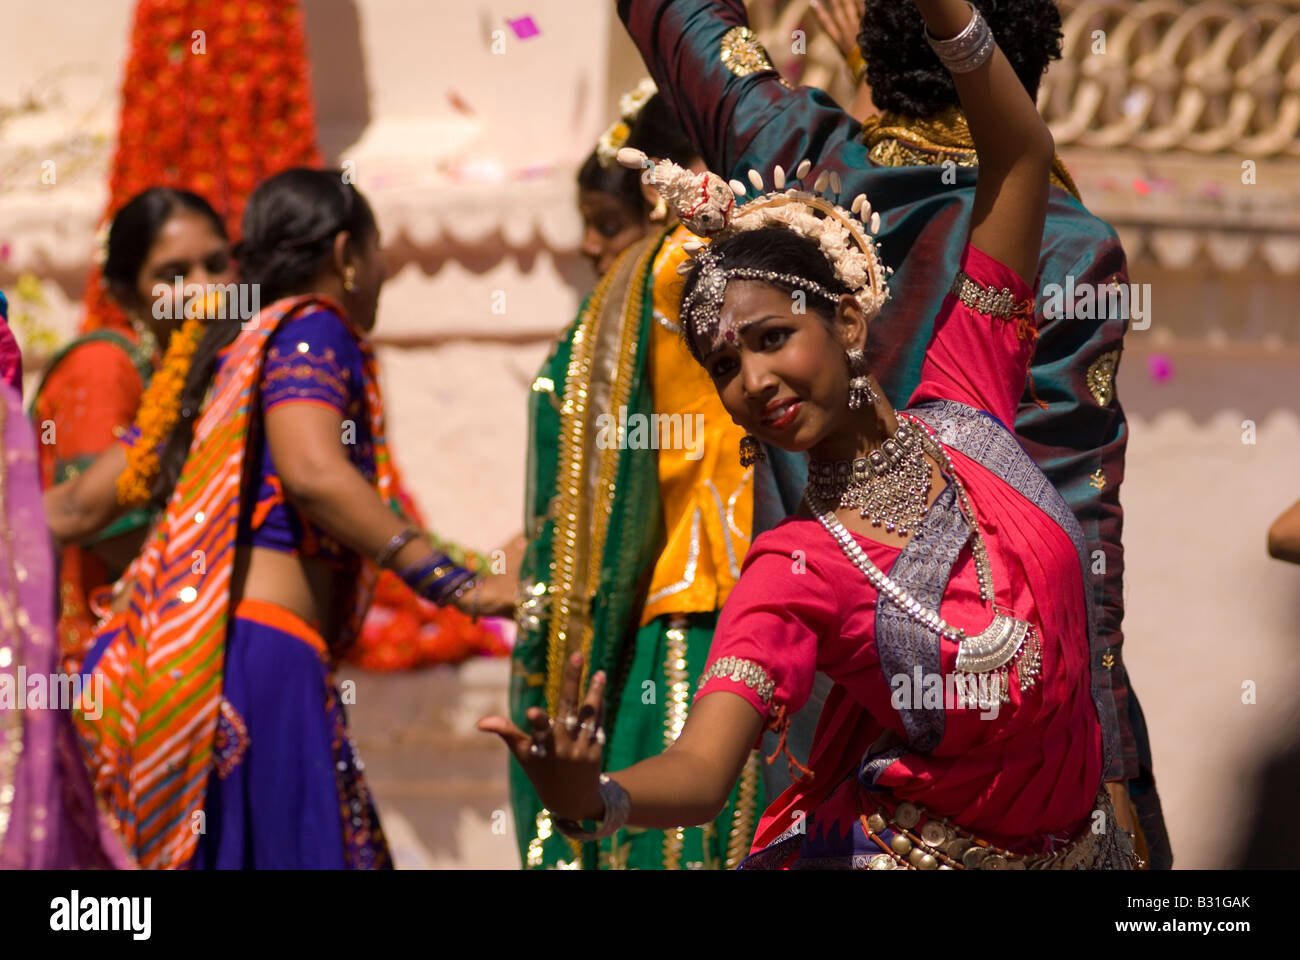 Filming of 'The Cheetah Girls : One World' at The City Palace, Udaipur, Rajasthan, India, Subcontinent, Asia Stock Photo